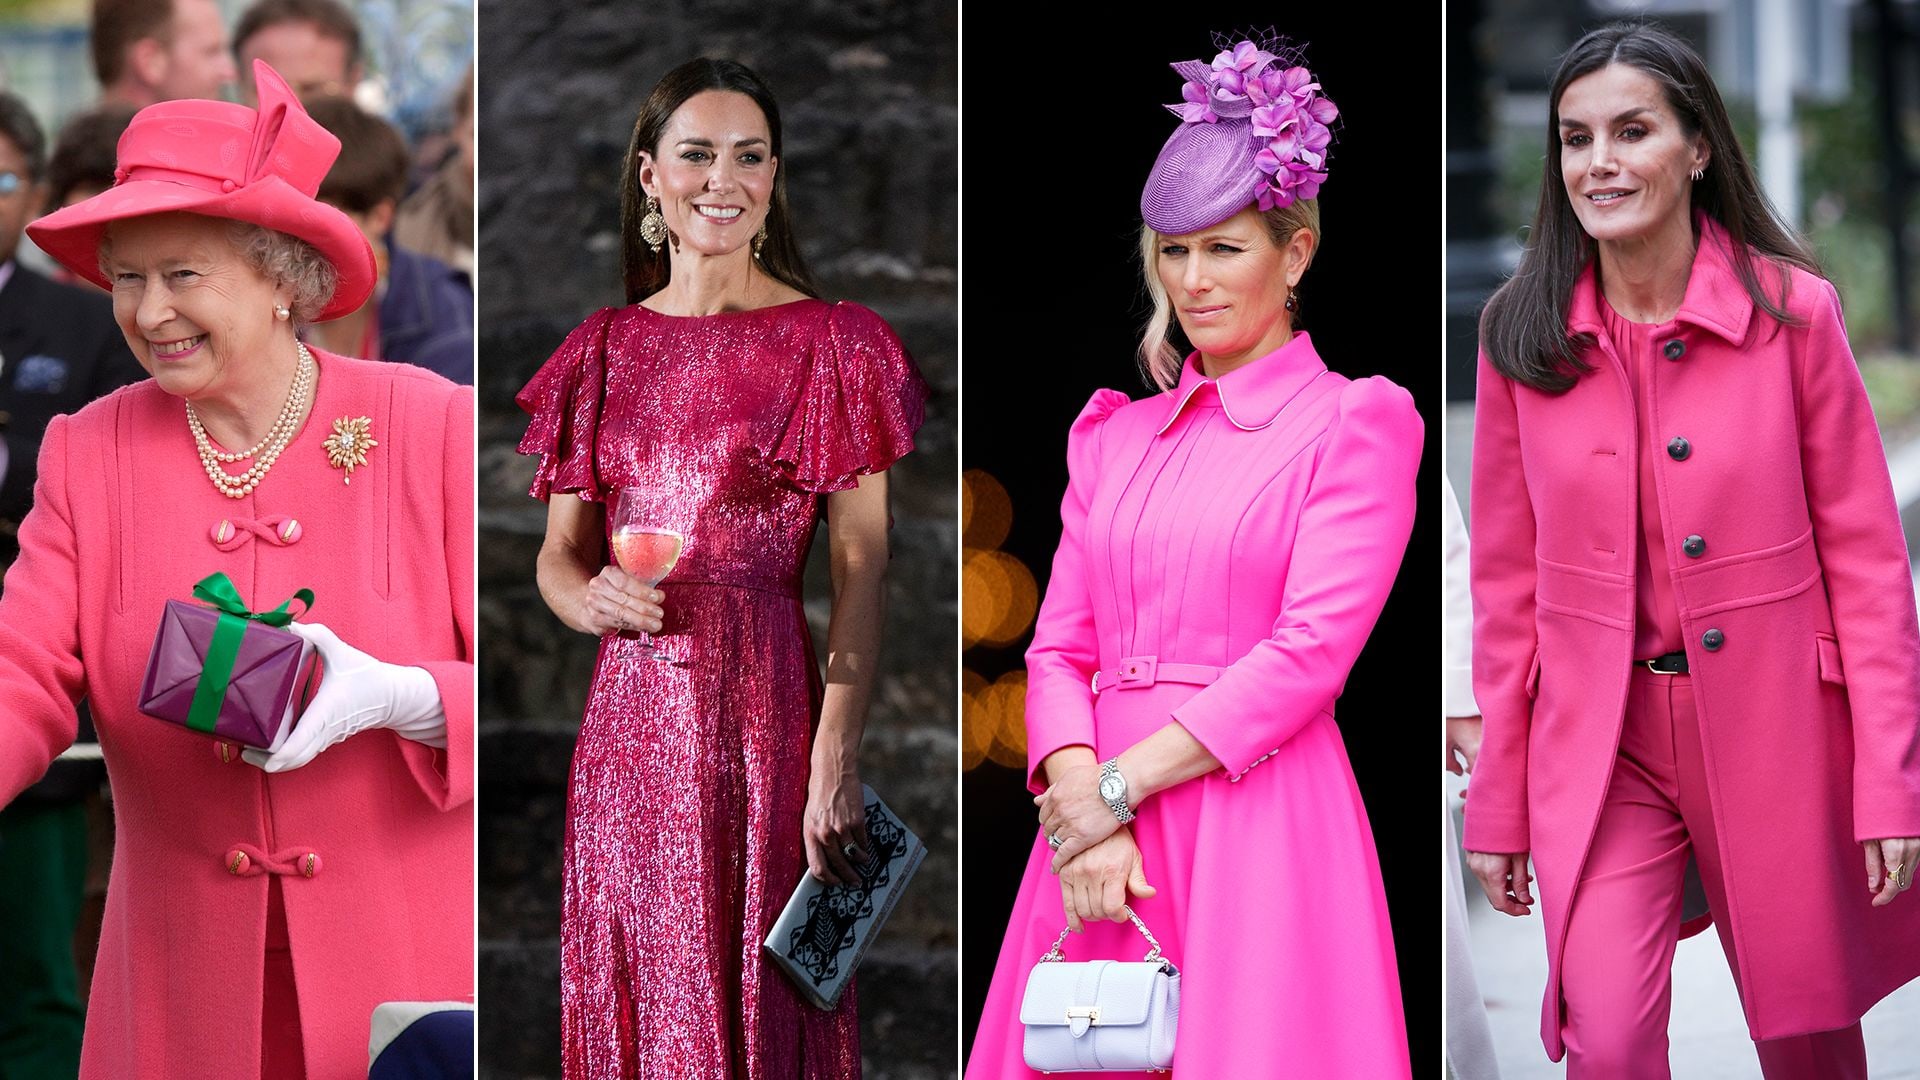 Queen Elizabeth Kate Middleton Zara Tindall and Queen Letizia in Barbie pink looks